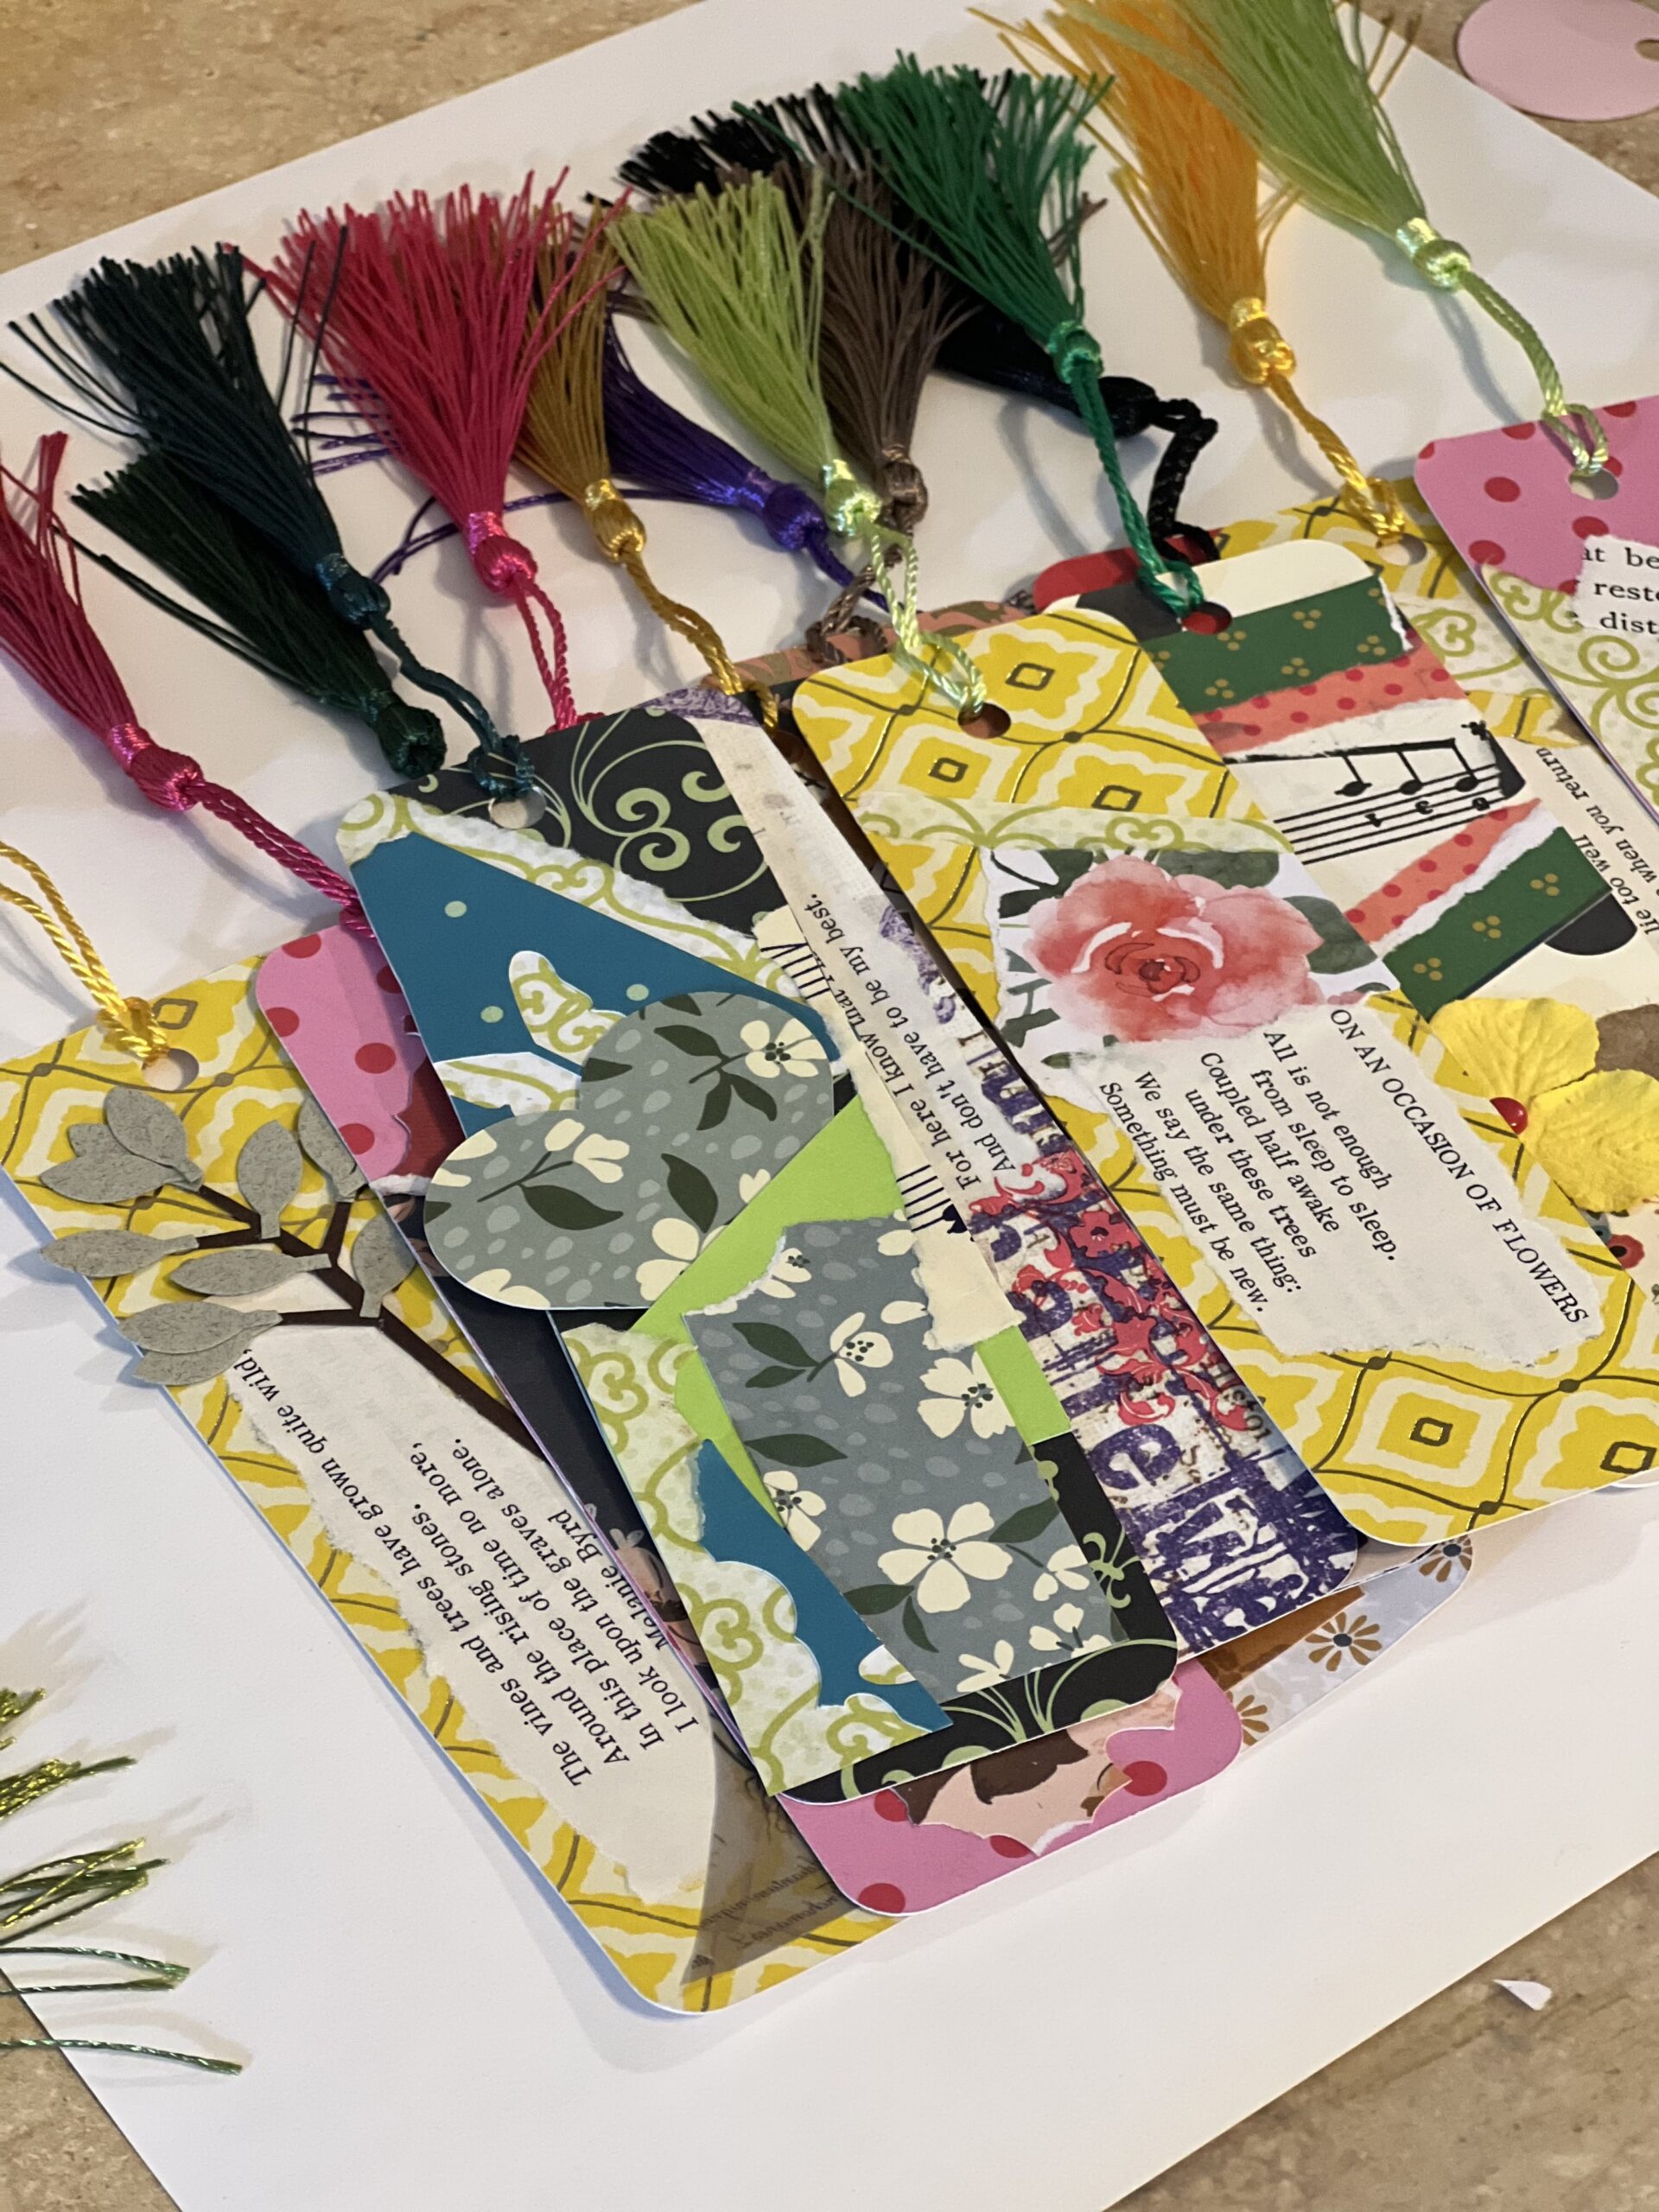 Multi-Colored bookmarks made by Sara DeBord and Shanning Brand books.